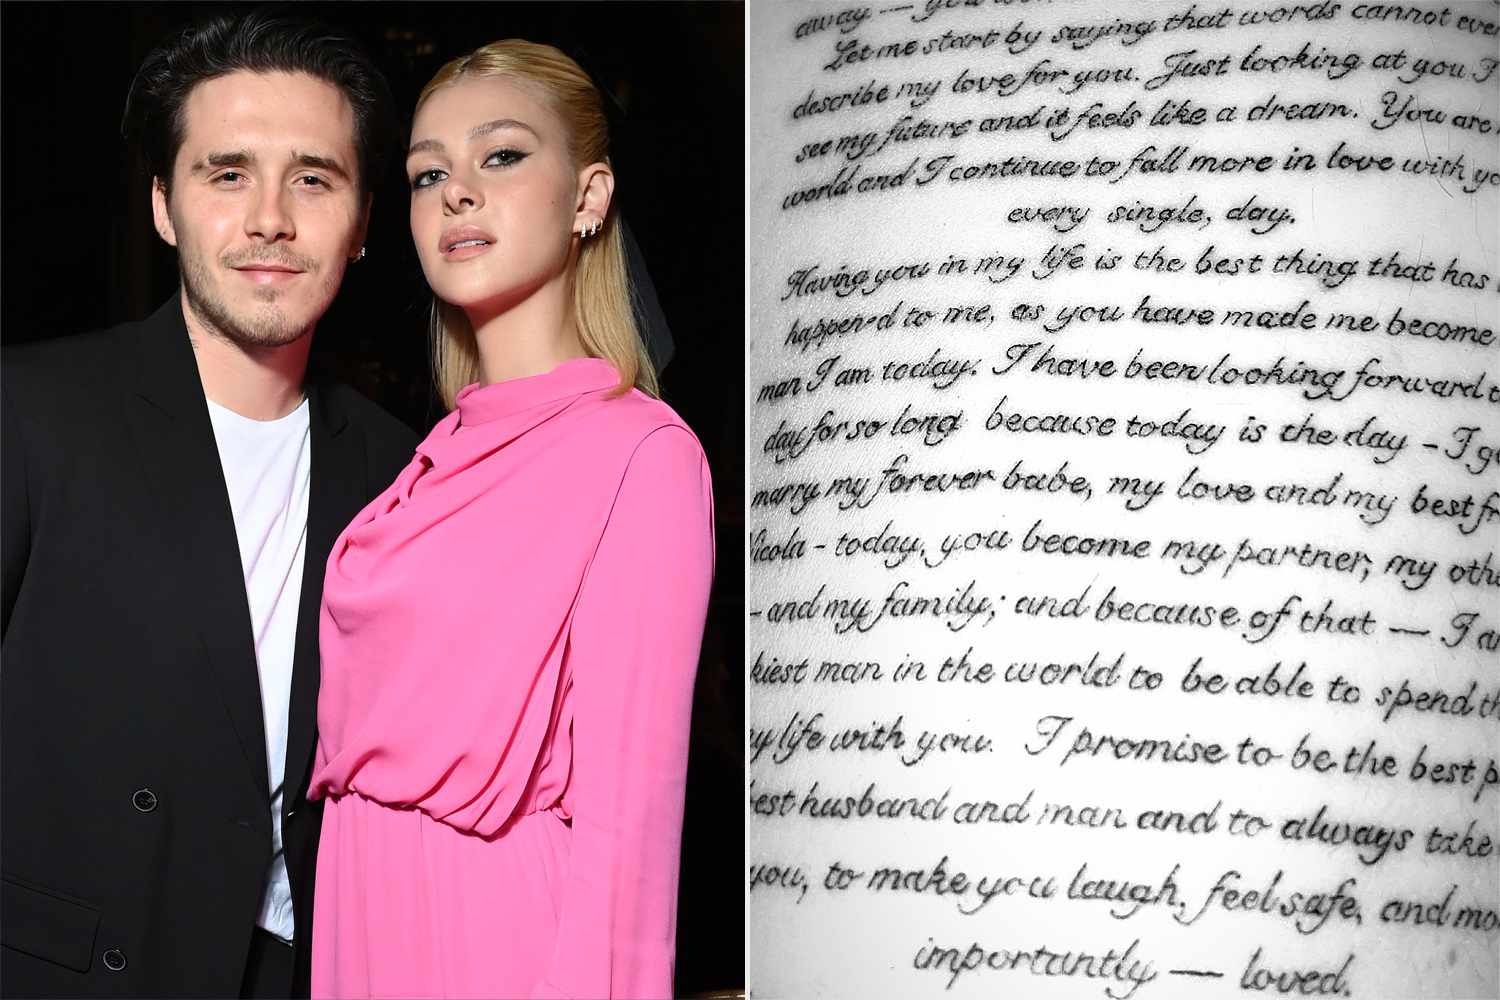 Brooklyn Beckham Pays Sweet Tribute to Wife Nicola Peltz with New Arm Tattoo of His Wedding Vows 